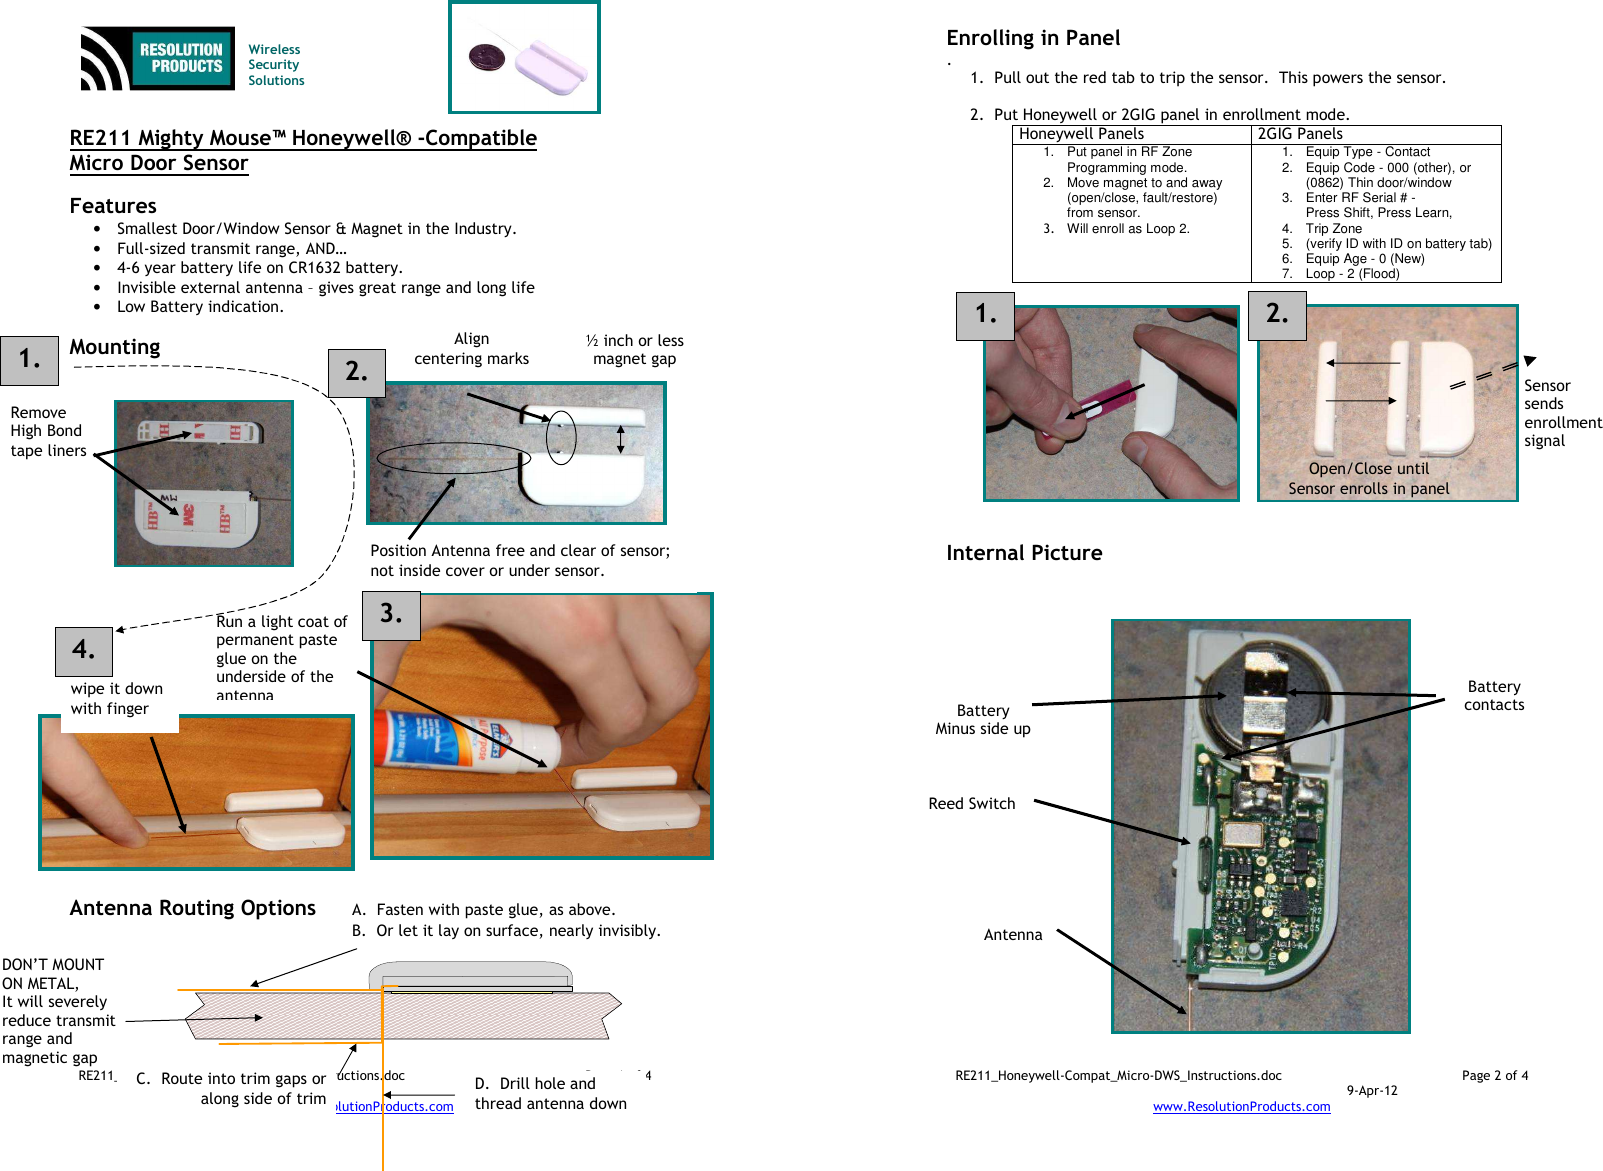 RE211_Honeywell-Compat_Micro-DWS_Instructions.doc  Page 1 of 4  9-Apr-12 www.ResolutionProducts.com     RE211 Mighty Mouse™ Honeywell® -Compatible  Micro Door Sensor  Features  • Smallest Door/Window Sensor &amp; Magnet in the Industry. • Full-sized transmit range, AND… • 4-6 year battery life on CR1632 battery. • Invisible external antenna – gives great range and long life • Low Battery indication.  Mounting                              Antenna Routing Options   Wireless  Security  Solutions Run a light coat of permanent paste glue on the underside of the antenna wipe it down with finger Remove High Bond tape liners Align centering marks Position Antenna free and clear of sensor; not inside cover or under sensor. DON’T MOUNT ON METAL, It will severely reduce transmit range and magnetic gap A.  Fasten with paste glue, as above.   B.  Or let it lay on surface, nearly invisibly. D.  Drill hole and thread antenna down C.  Route into trim gaps or along side of trim 1. 2. ½ inch or less magnet gap 3. 4. RE211_Honeywell-Compat_Micro-DWS_Instructions.doc  Page 2 of 4  9-Apr-12 www.ResolutionProducts.com  Enrolling in Panel . 1. Pull out the red tab to trip the sensor.  This powers the sensor.  2. Put Honeywell or 2GIG panel in enrollment mode. Honeywell Panels  2GIG Panels 1.  Put panel in RF Zone Programming mode. 2.  Move magnet to and away (open/close, fault/restore) from sensor. 3.  Will enroll as Loop 2.  1.  Equip Type - Contact 2.  Equip Code - 000 (other), or (0862) Thin door/window 3.  Enter RF Serial # -  Press Shift, Press Learn, 4.  Trip Zone 5.  (verify ID with ID on battery tab) 6.  Equip Age - 0 (New) 7.  Loop - 2 (Flood)               Internal Picture Open/Close until  Sensor enrolls in panel Sensor  sends enrollment signal  Battery Minus side up  Reed Switch  Antenna  Battery contacts  1.  2. 